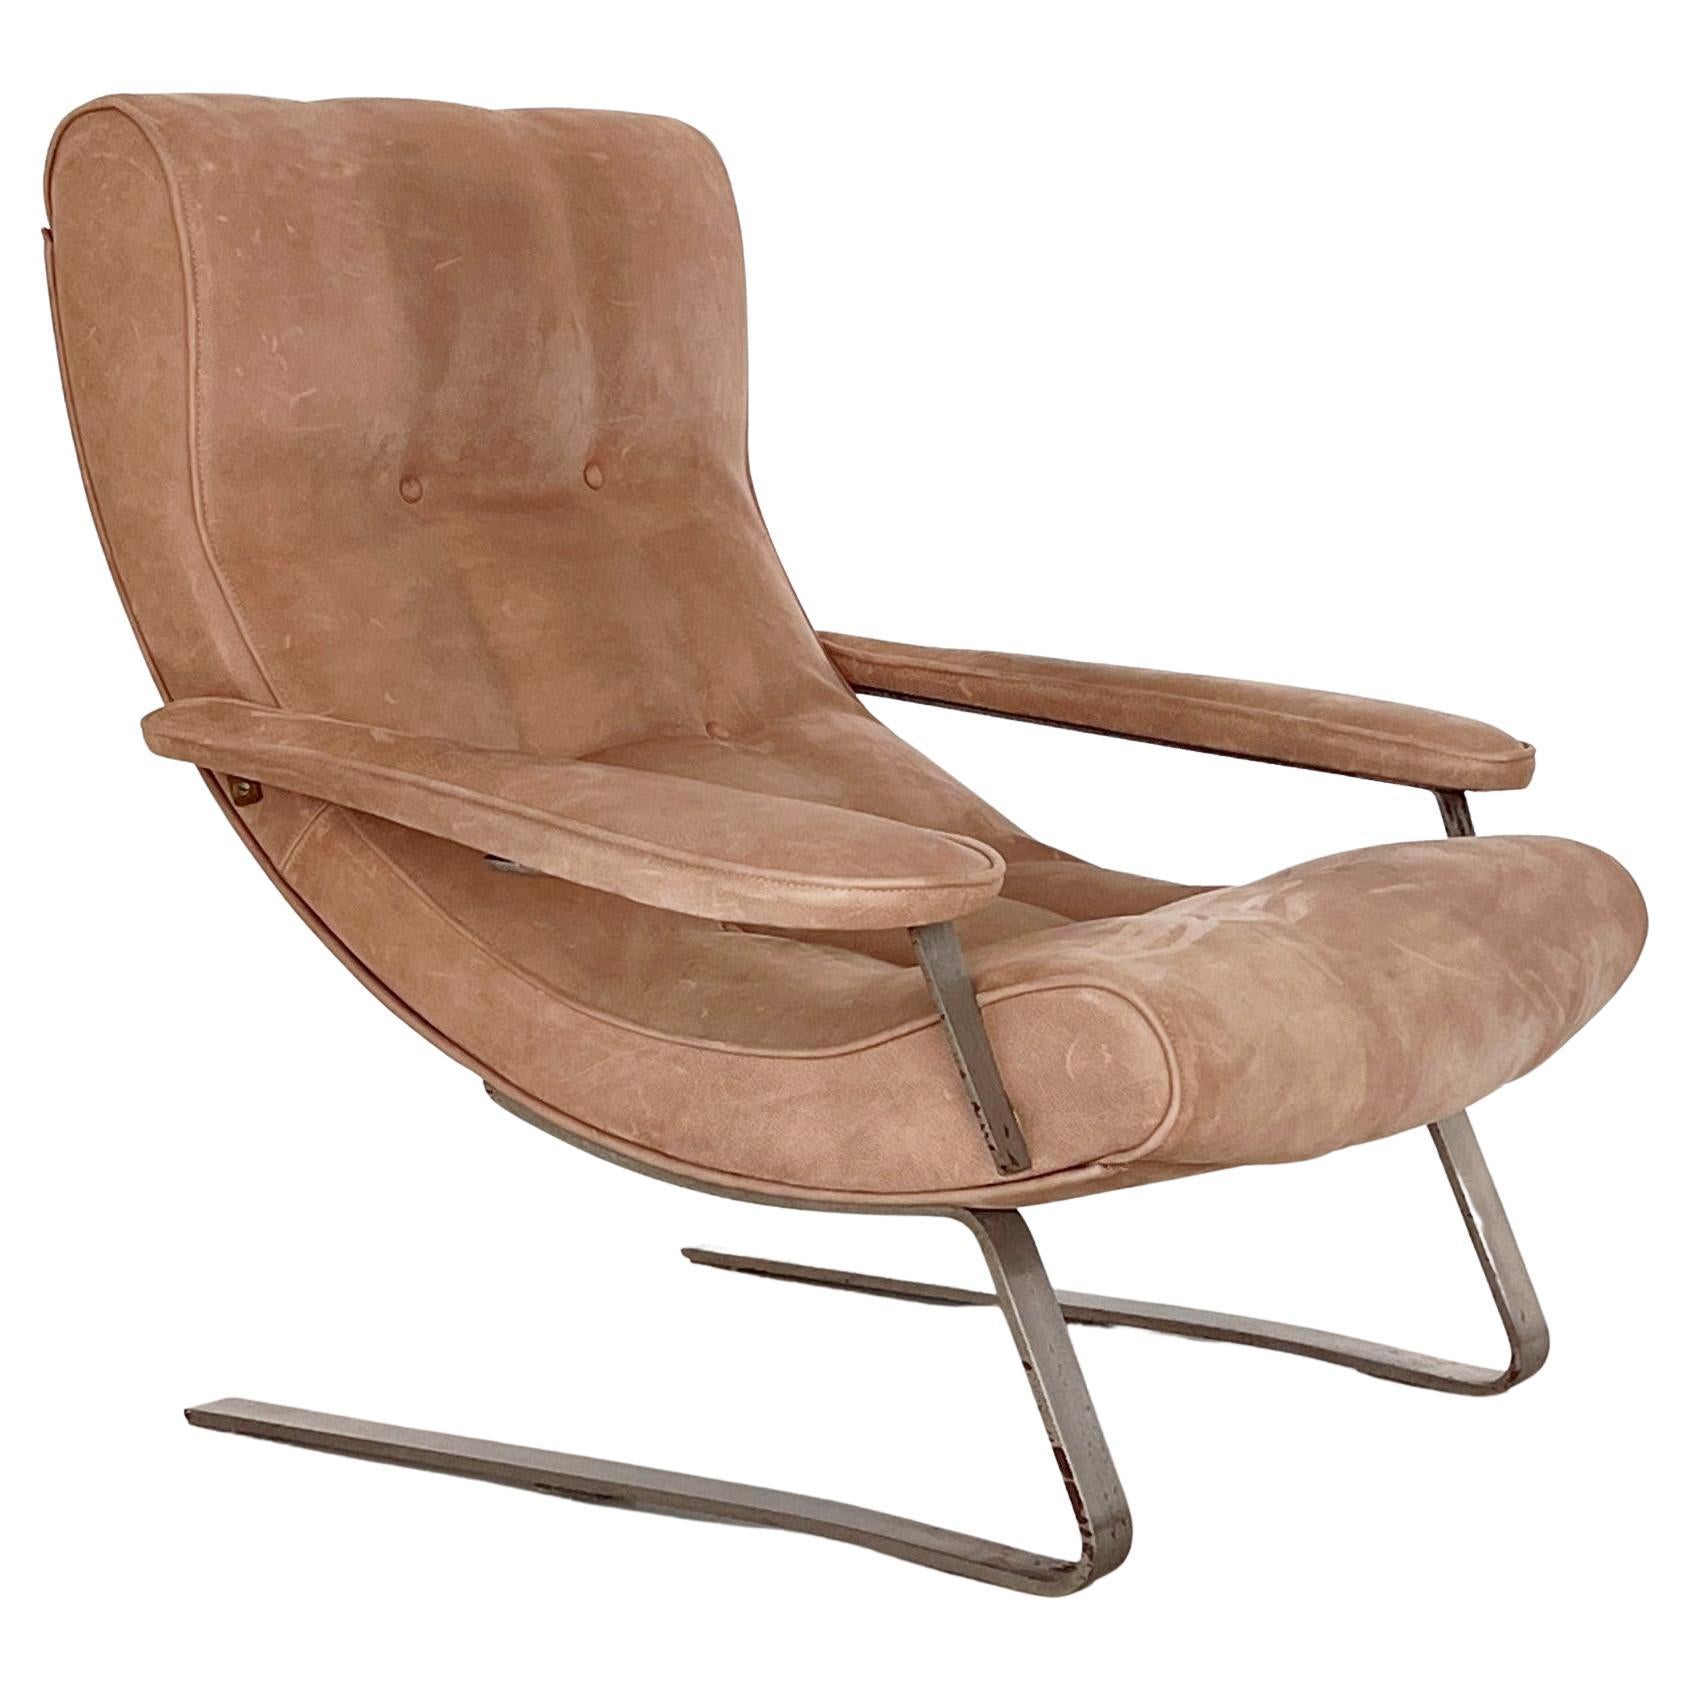 Midcentury Lounge Chair in Suede by Guido Bonzani for Tecnosalotto, 1970s For Sale